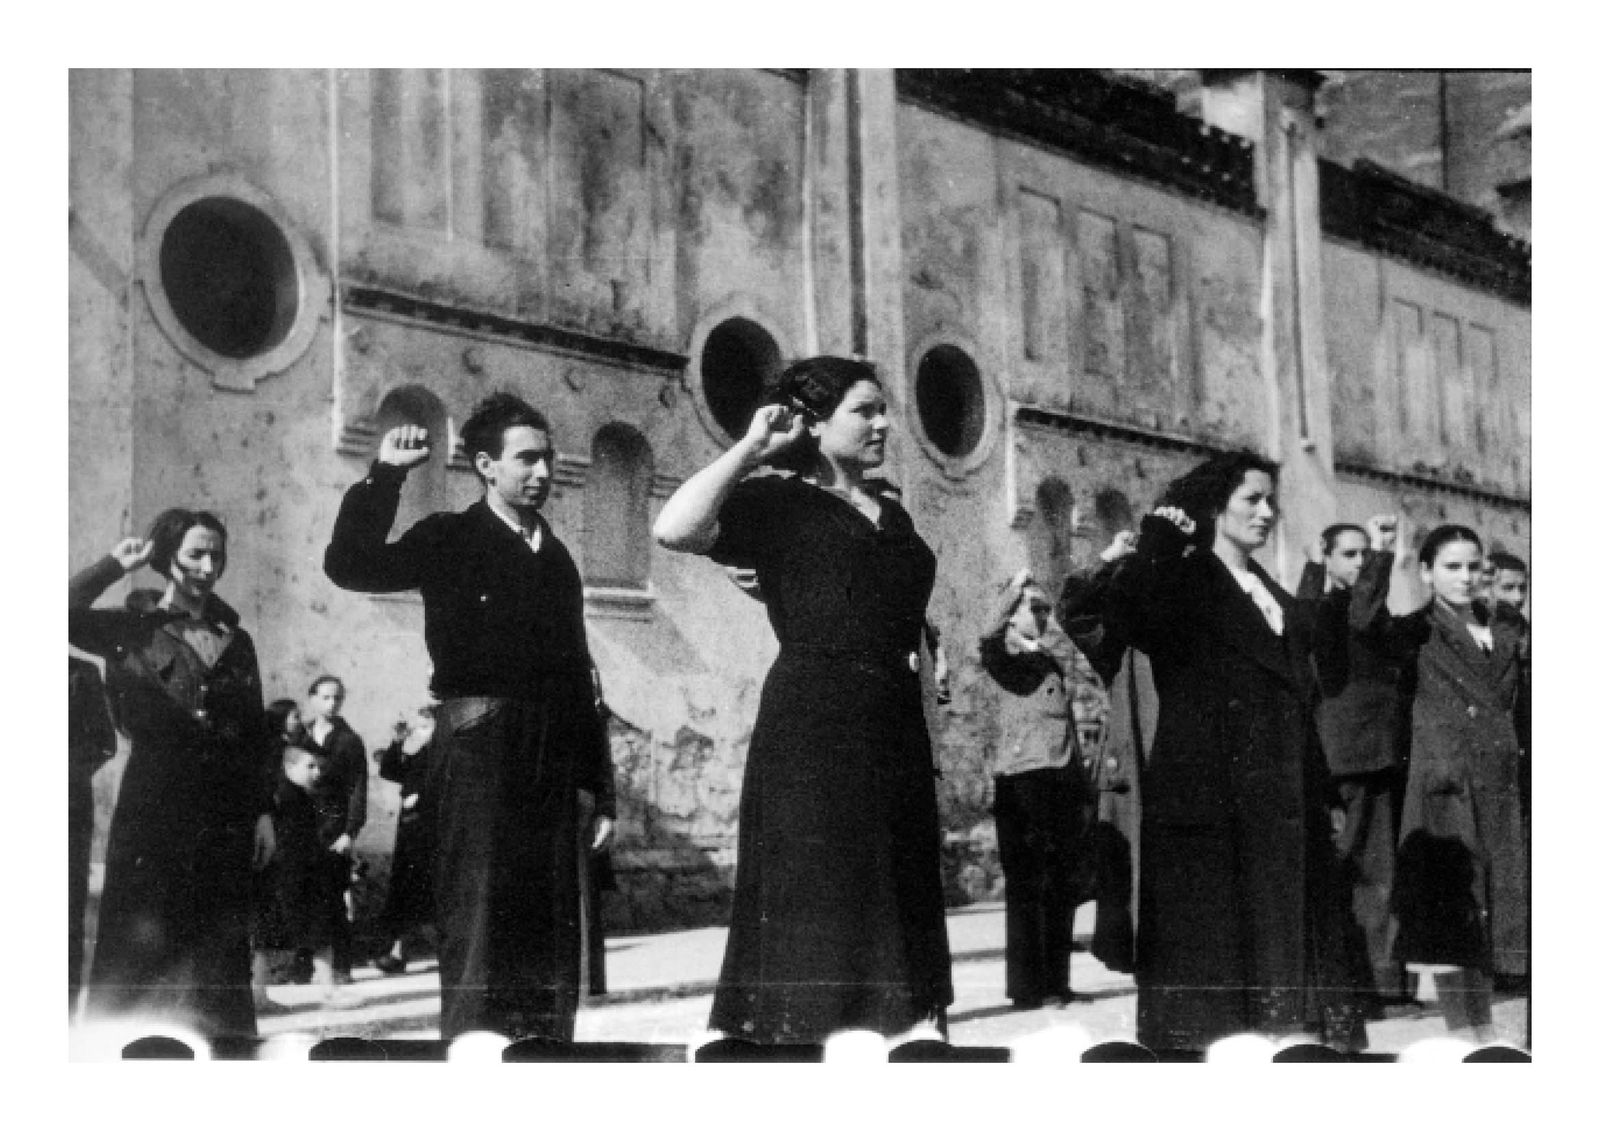 © Francesca Seravalle - Raised Fist.  Communist and anarchic salute with the fist beside the head, Spanish Civil War 1930s. PDM